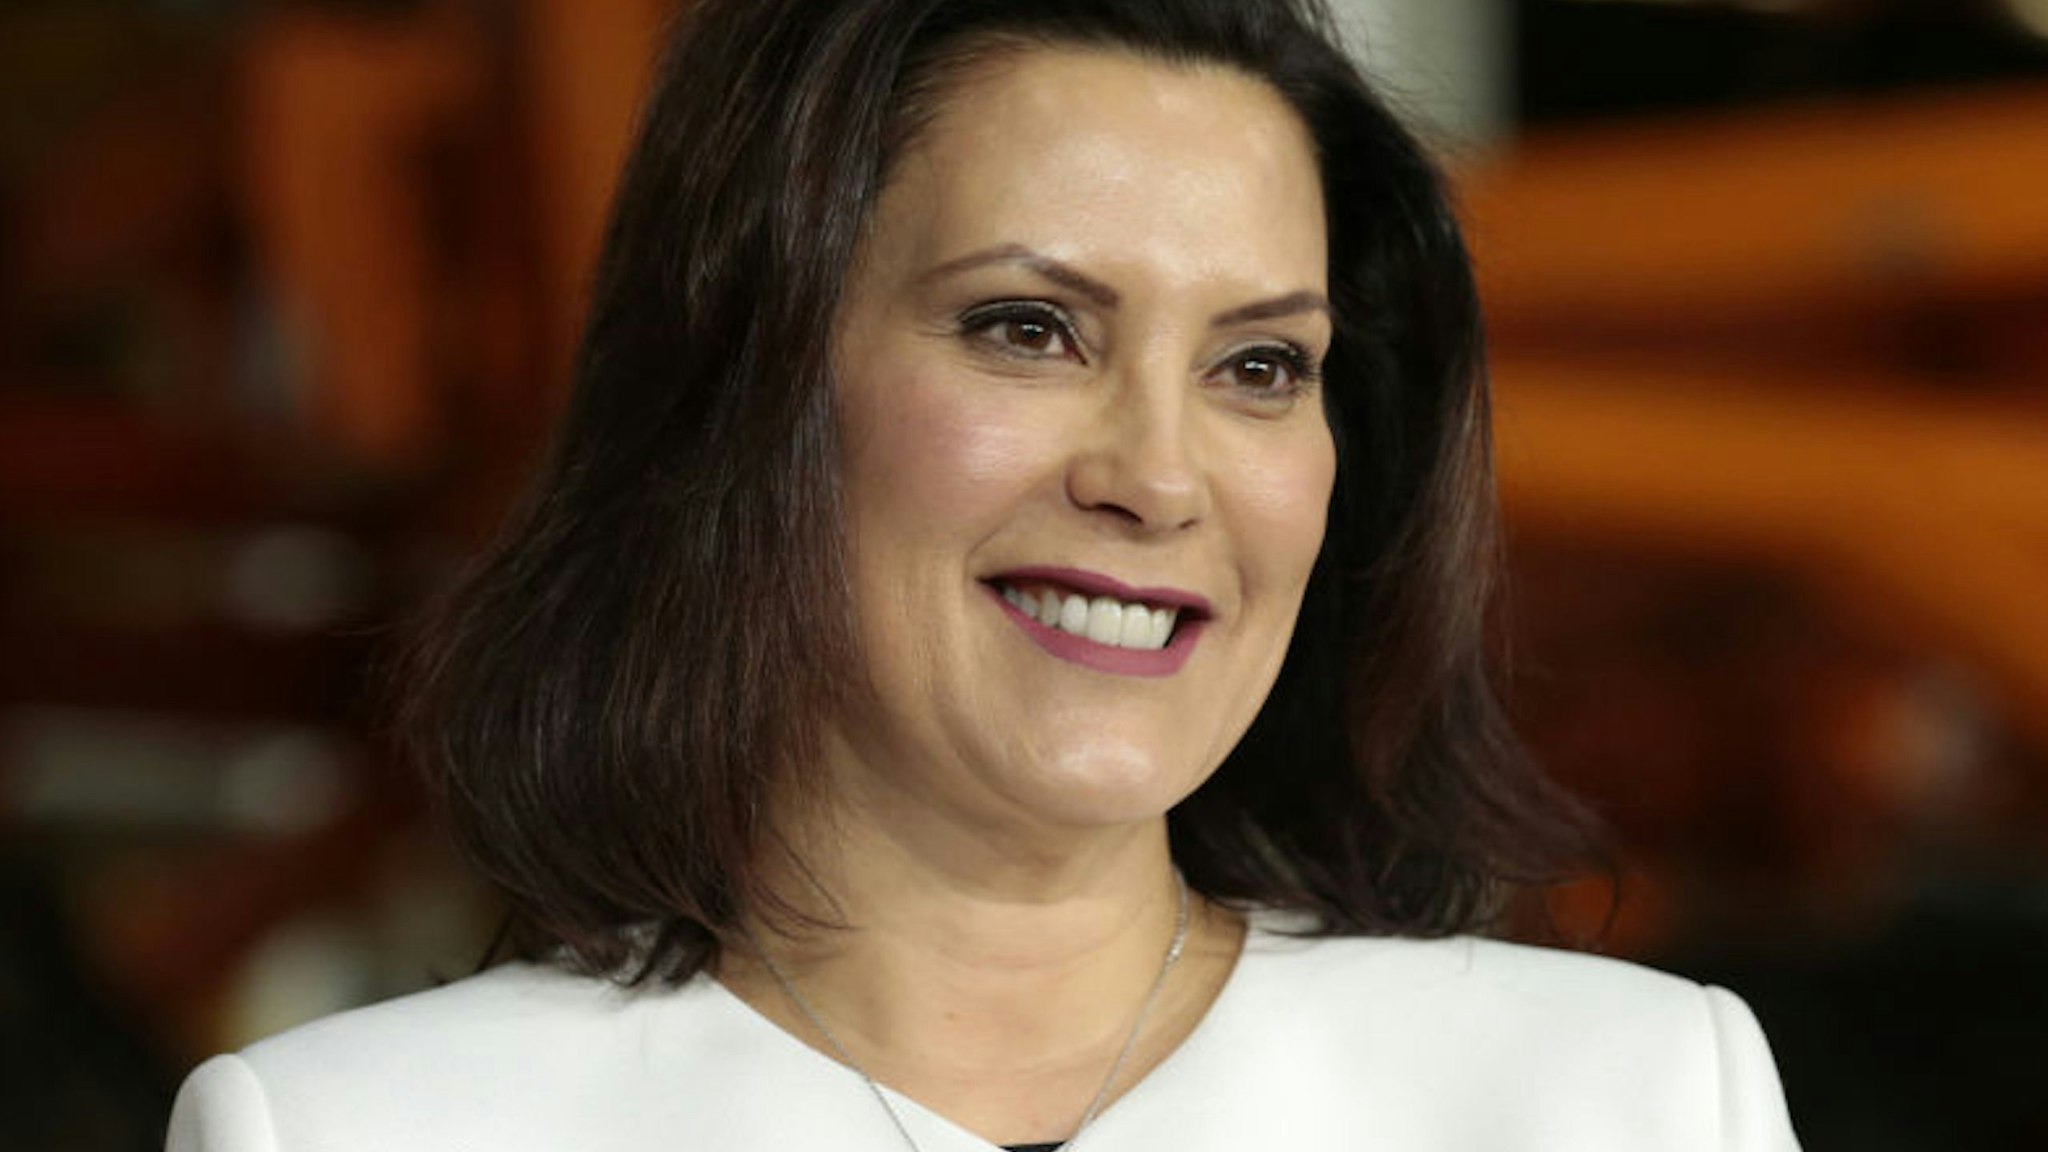 Gretchen Whitmer, governor of Michigan, smiles during an event at the General Motors Co. Orion Assembly plant in Orion Township, Michigan, U.S., on Friday, March 22, 2019. General Motors Co. committed to investing $1.8 billion at plants in six states and to creating 700 new jobs, as the largest U.S. automaker looks to ward off months of criticism by President Donald Trump